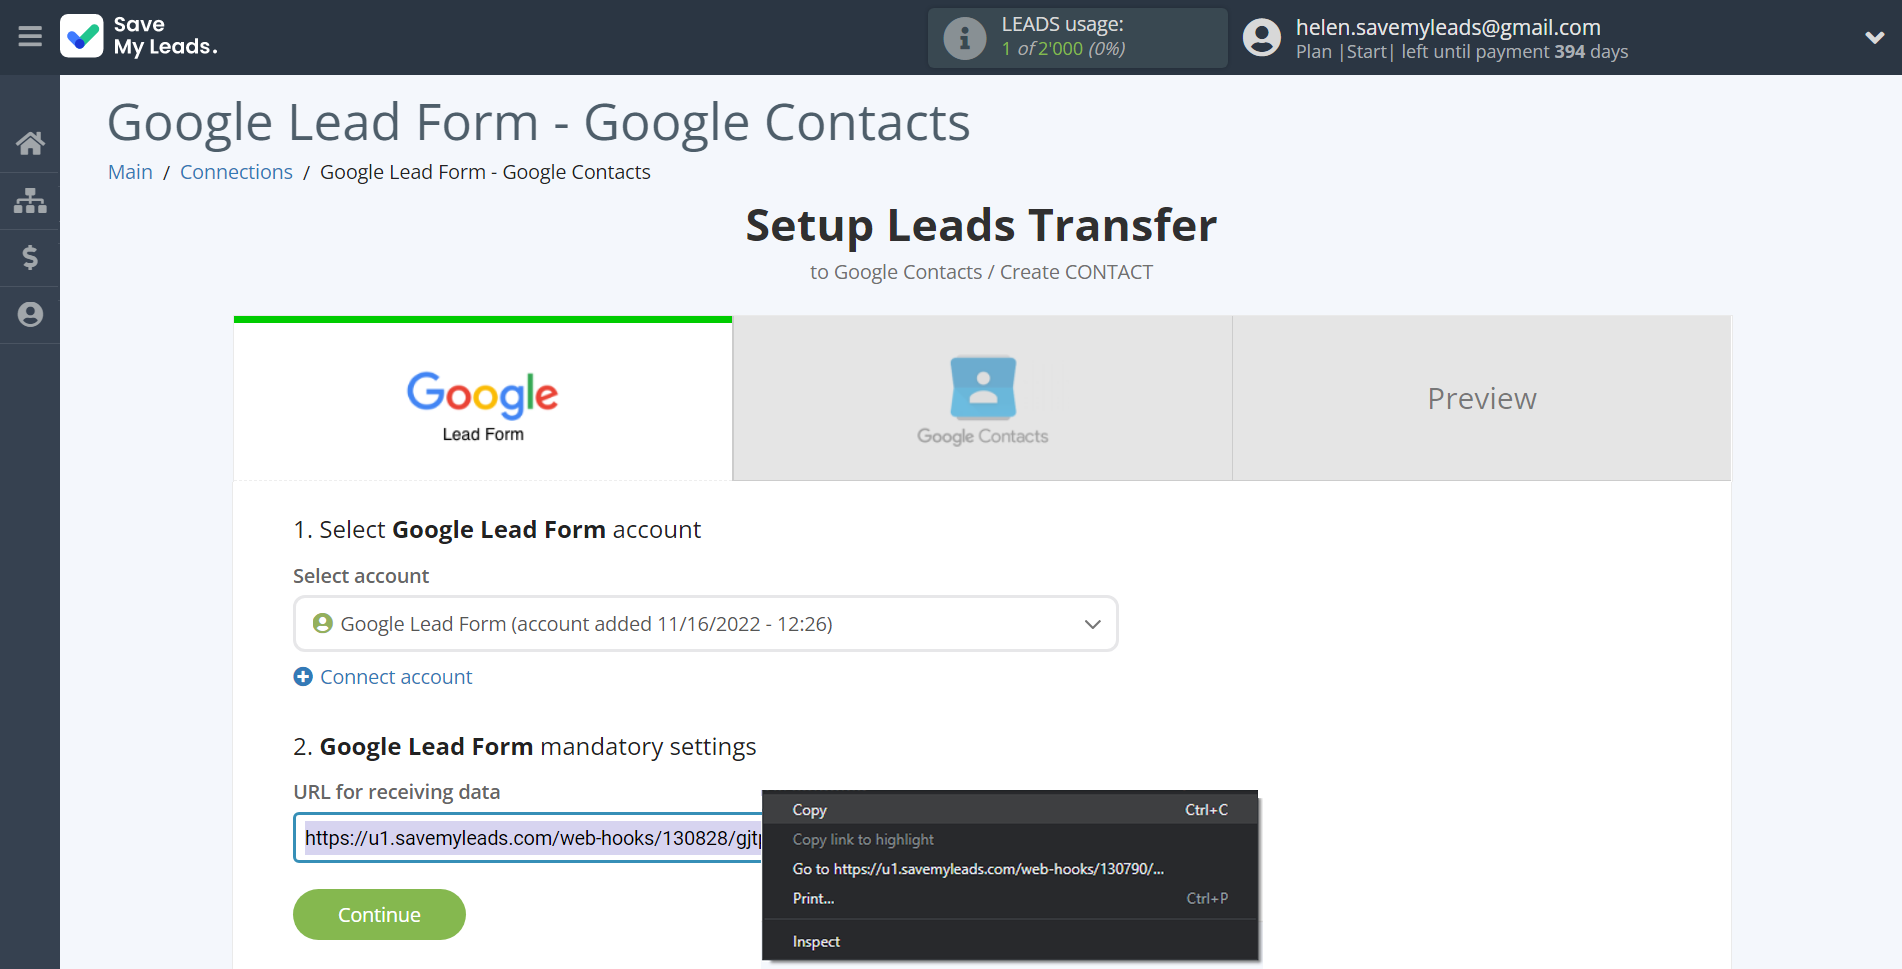 How to Connect Google Lead Form with Google Contacts | Data Source account connection